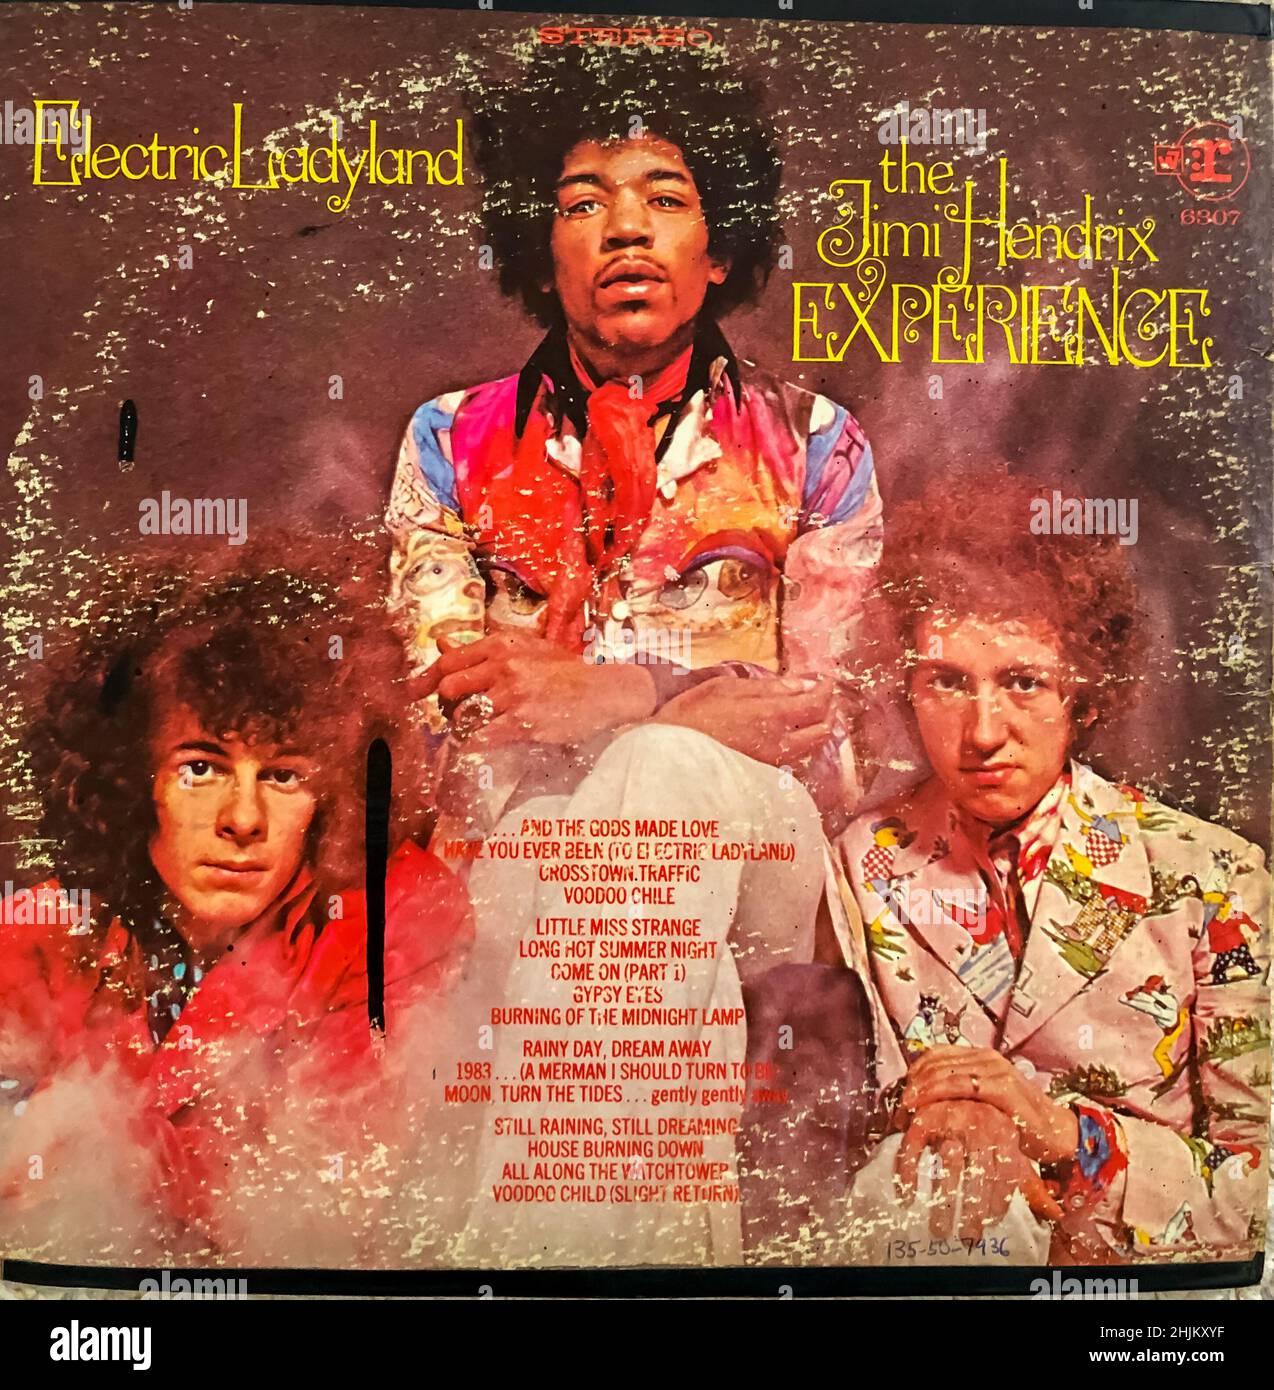 Jimi Hendrix, Electric Ladyland, Album Music Collection, Warner Rerise Records, 1960s rock album cover, classic rock vinyl albums, vintage covers Stock Photo